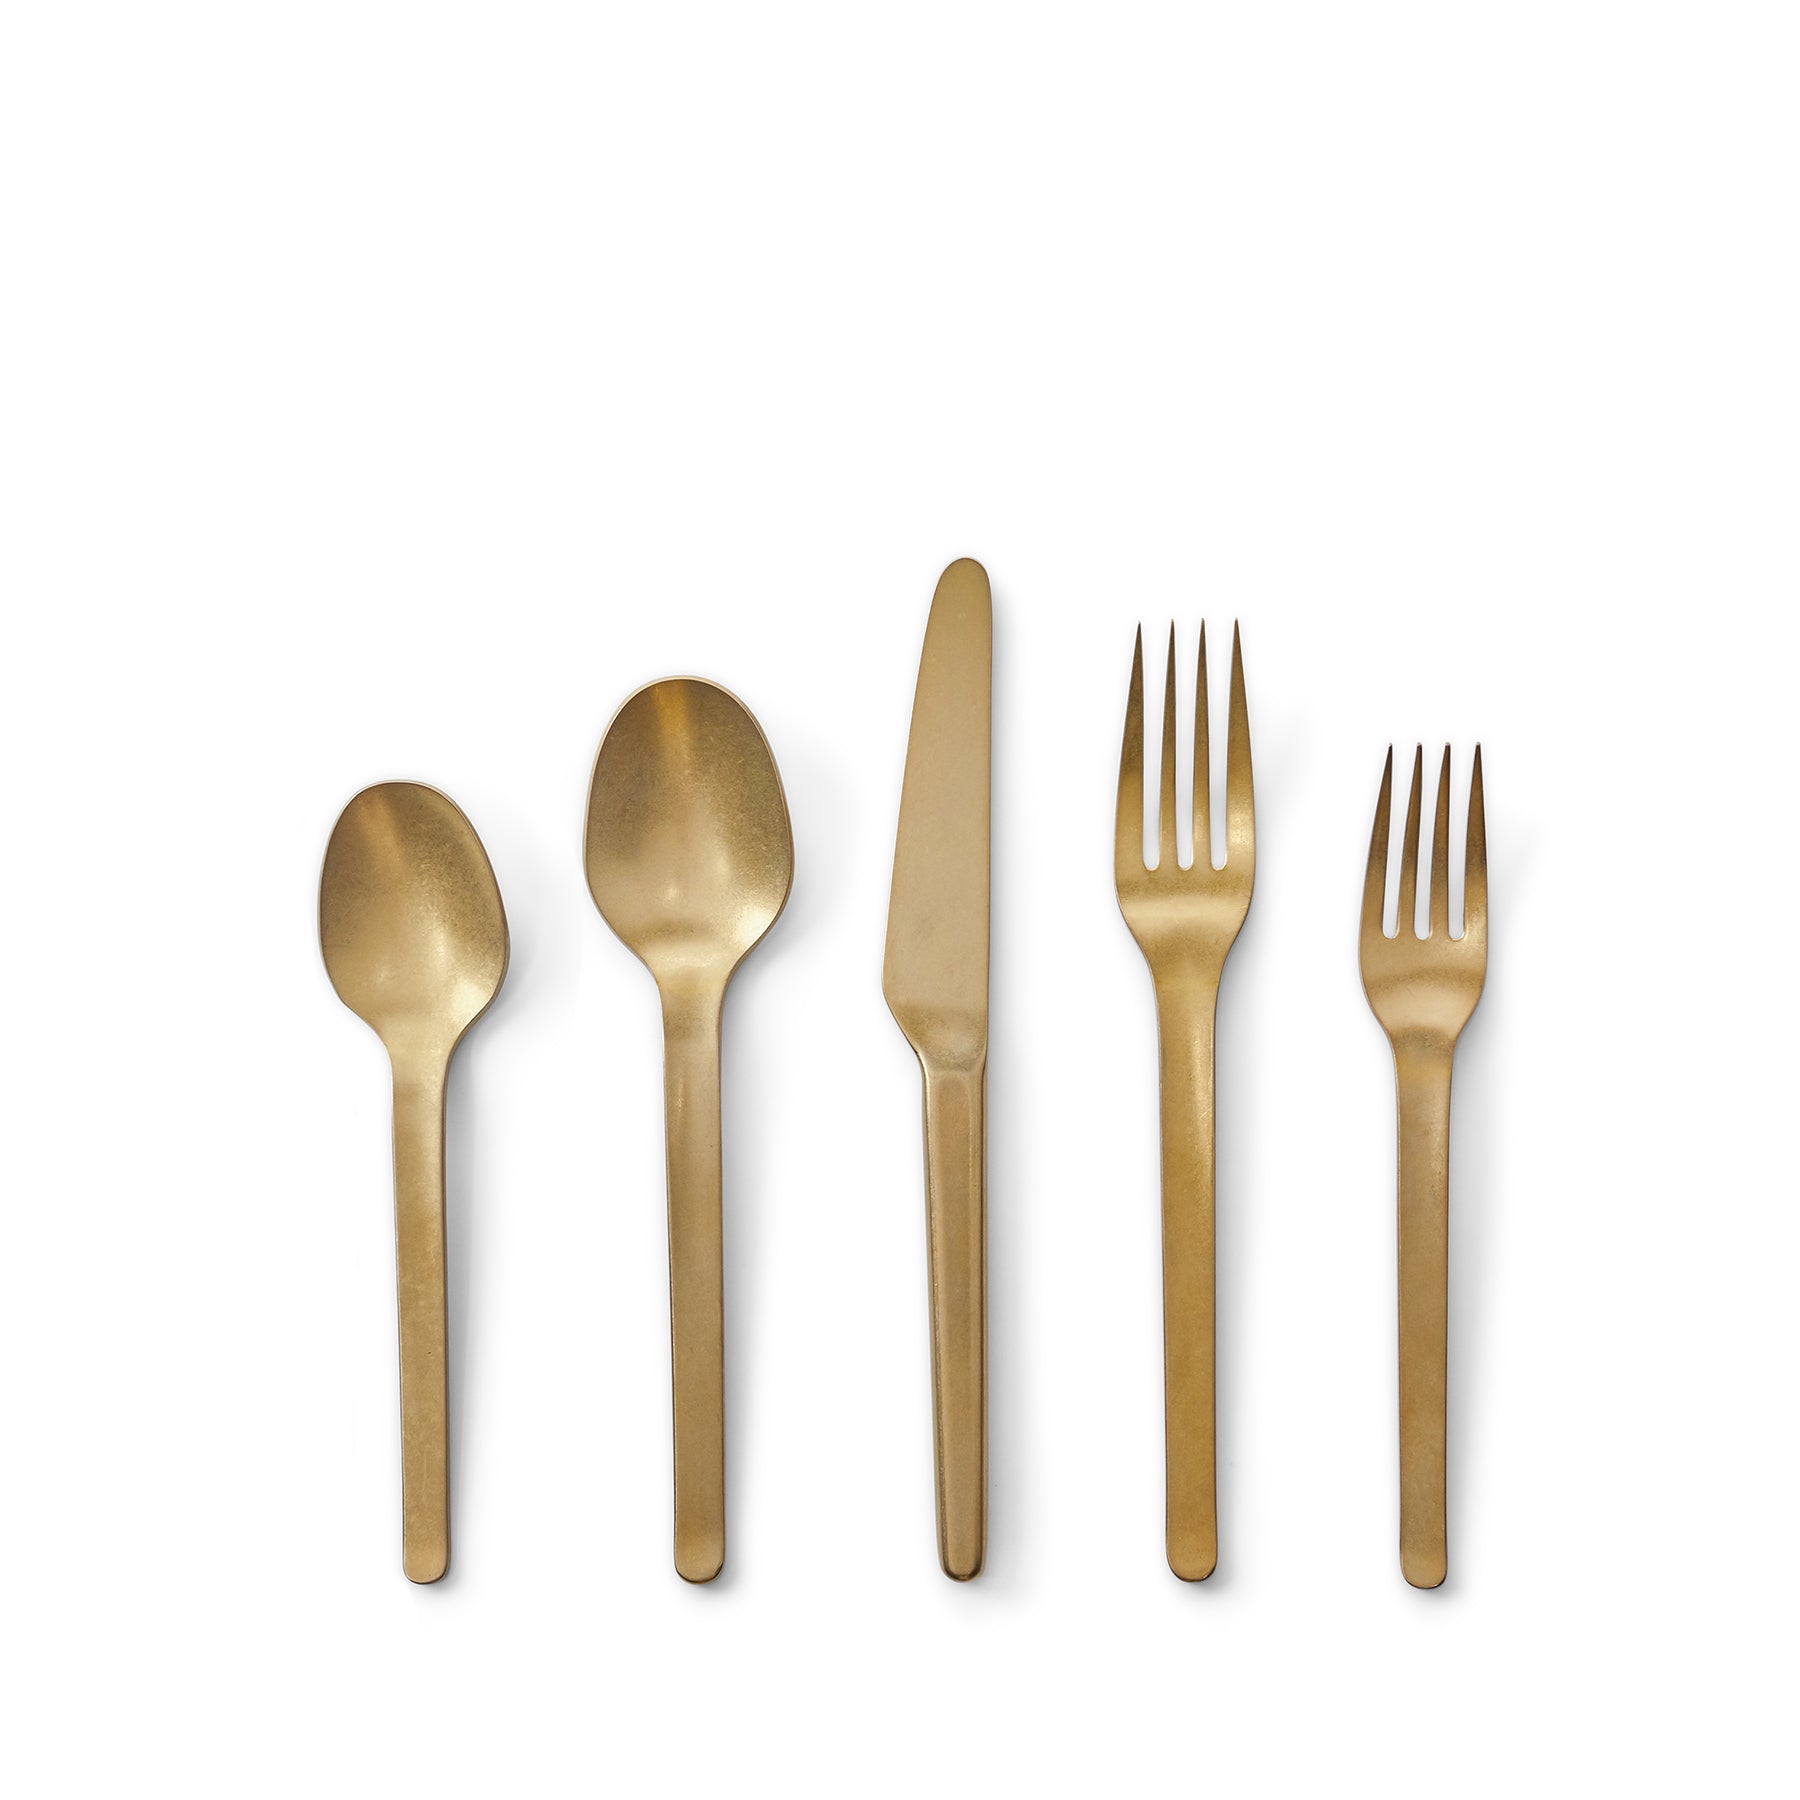 Muir Flatware in Amber (5 Piece Setting) Zoom Image 1